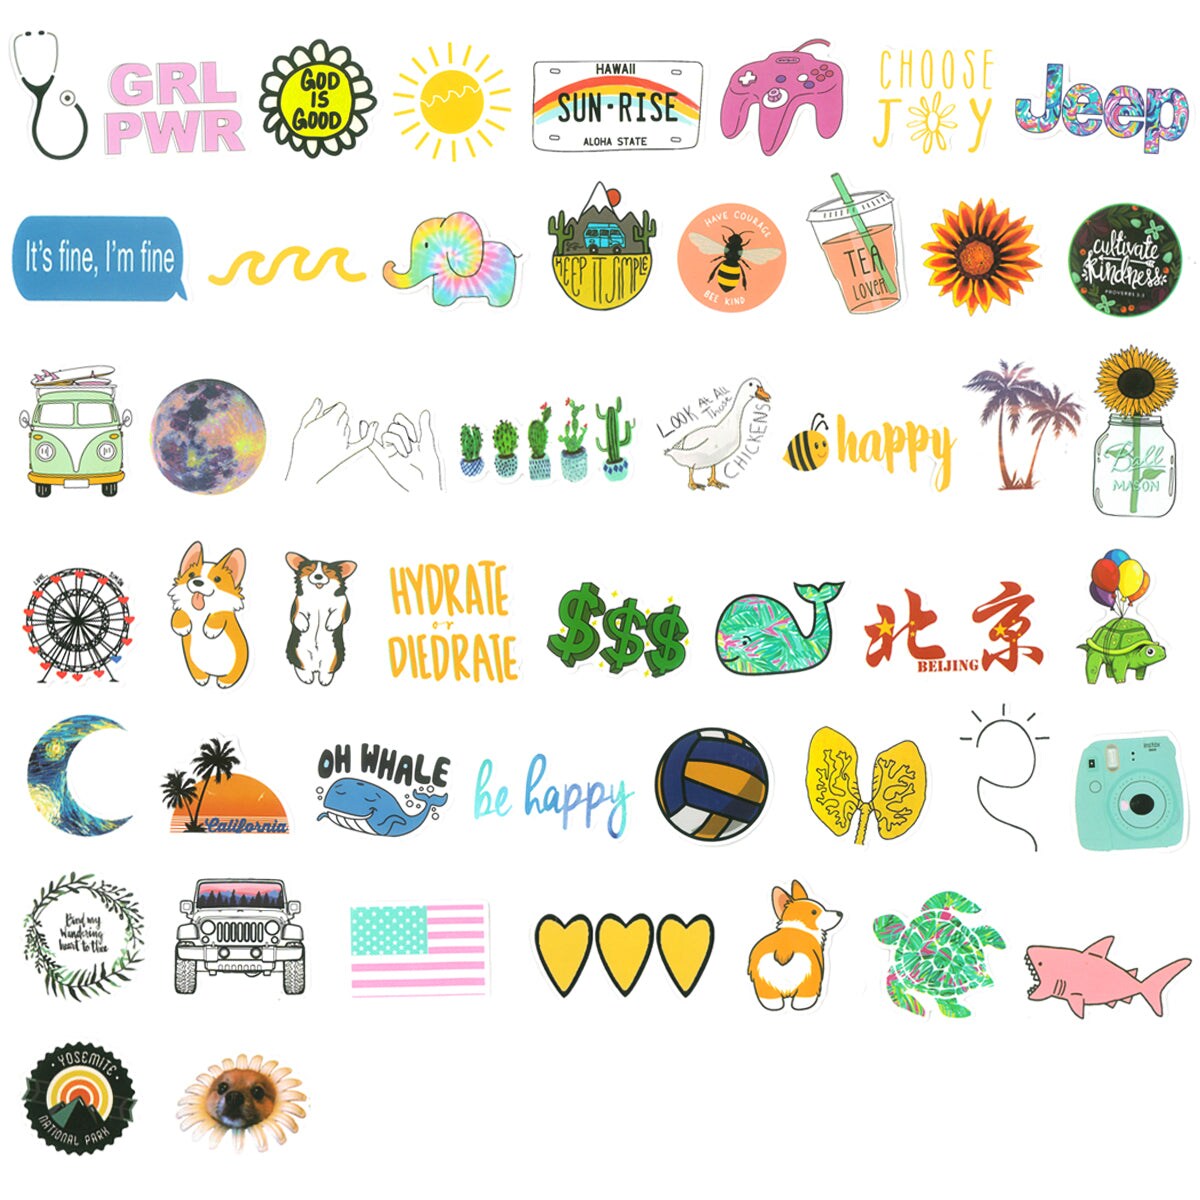 Wrapables Waterproof Vinyl Stickers for Water Bottles, Laptop, Phones,  Skateboards, Decals for Teens, 100pcs